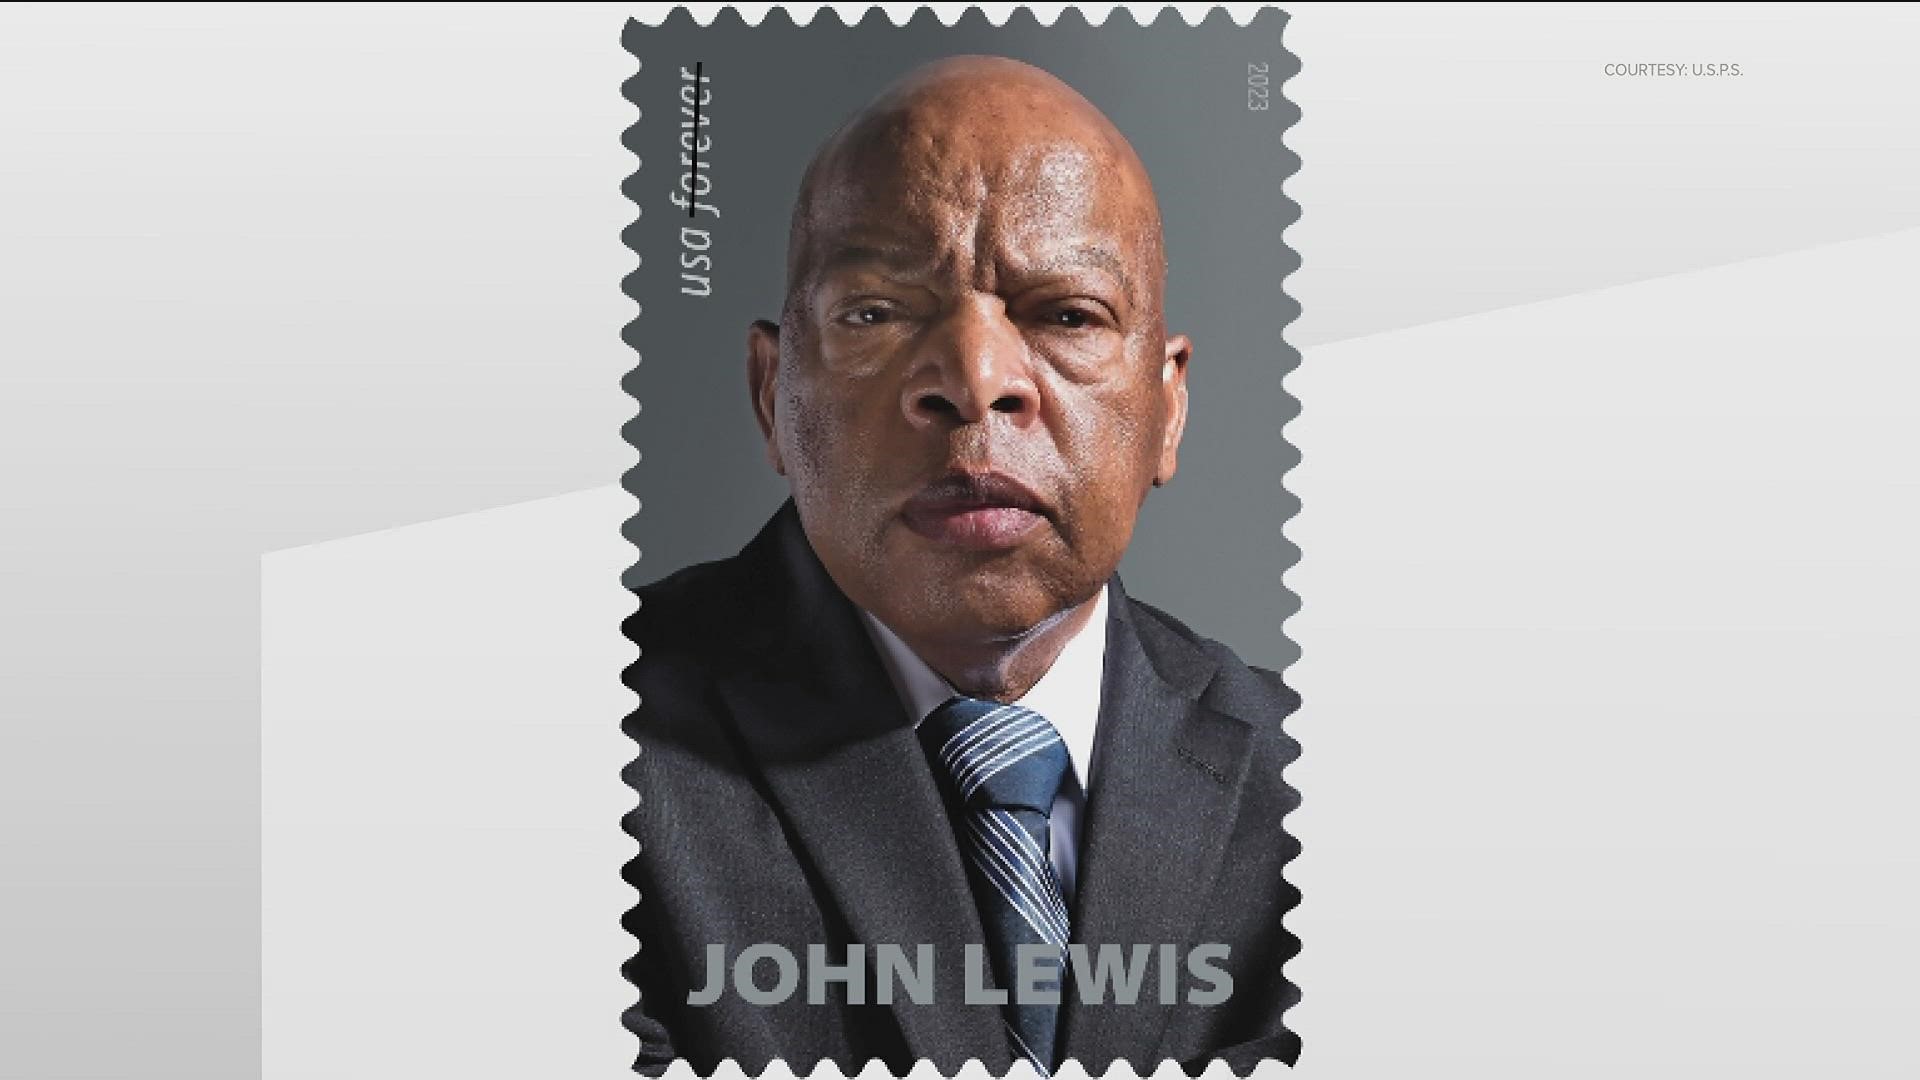 The United States Postal Service says the stamp will come out next year.